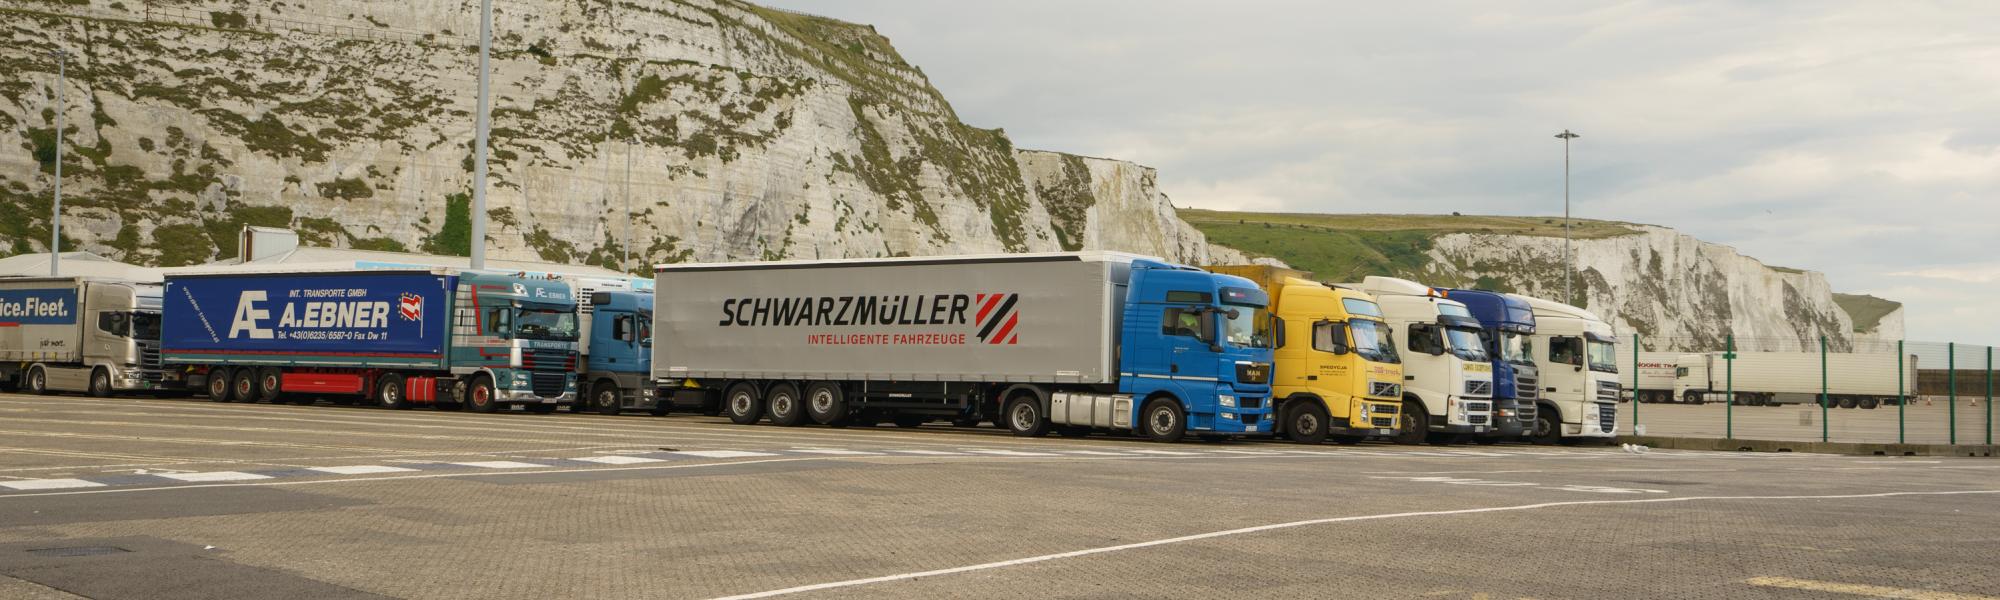 Trucks waiting in the queue to board ferry at Dover port